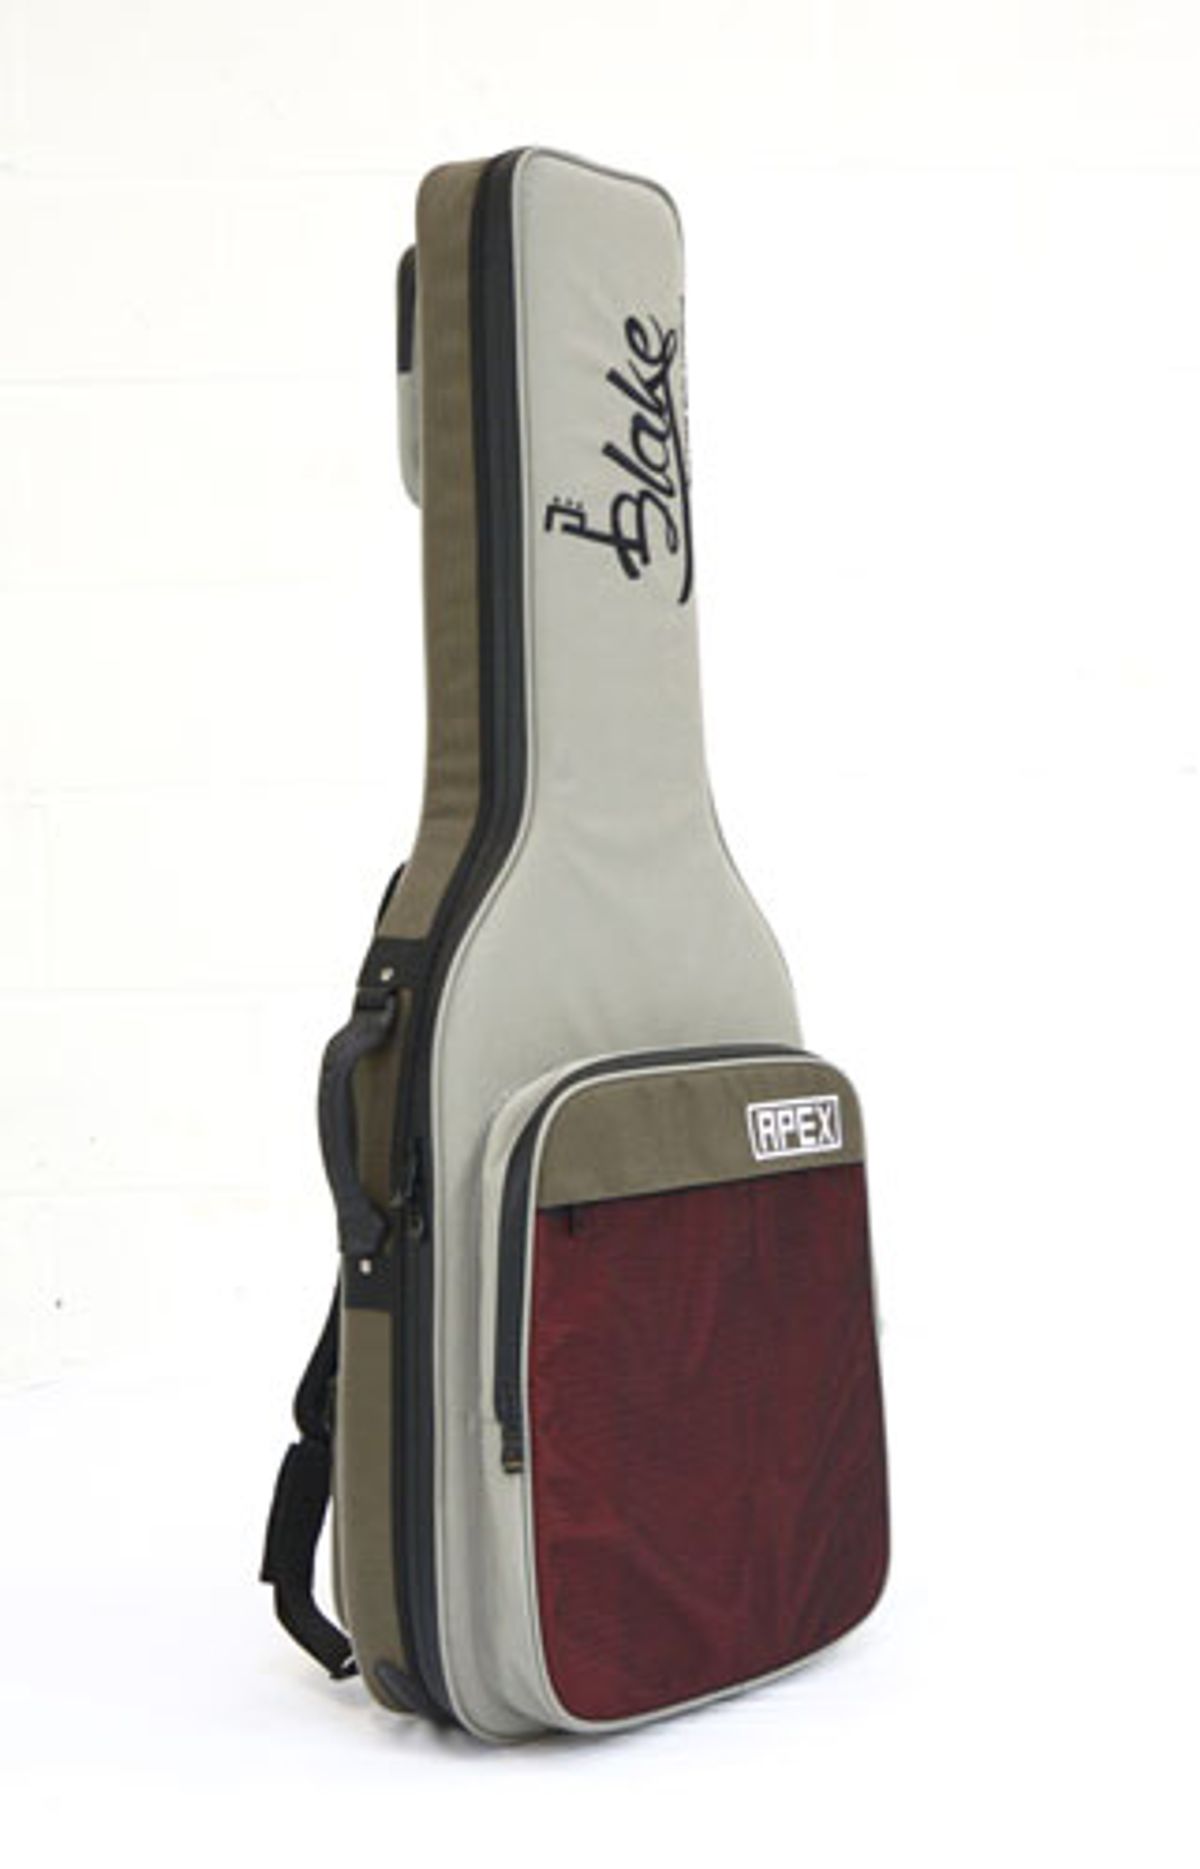 Blake Guitar Solutions Releases the Apex Guitar Case